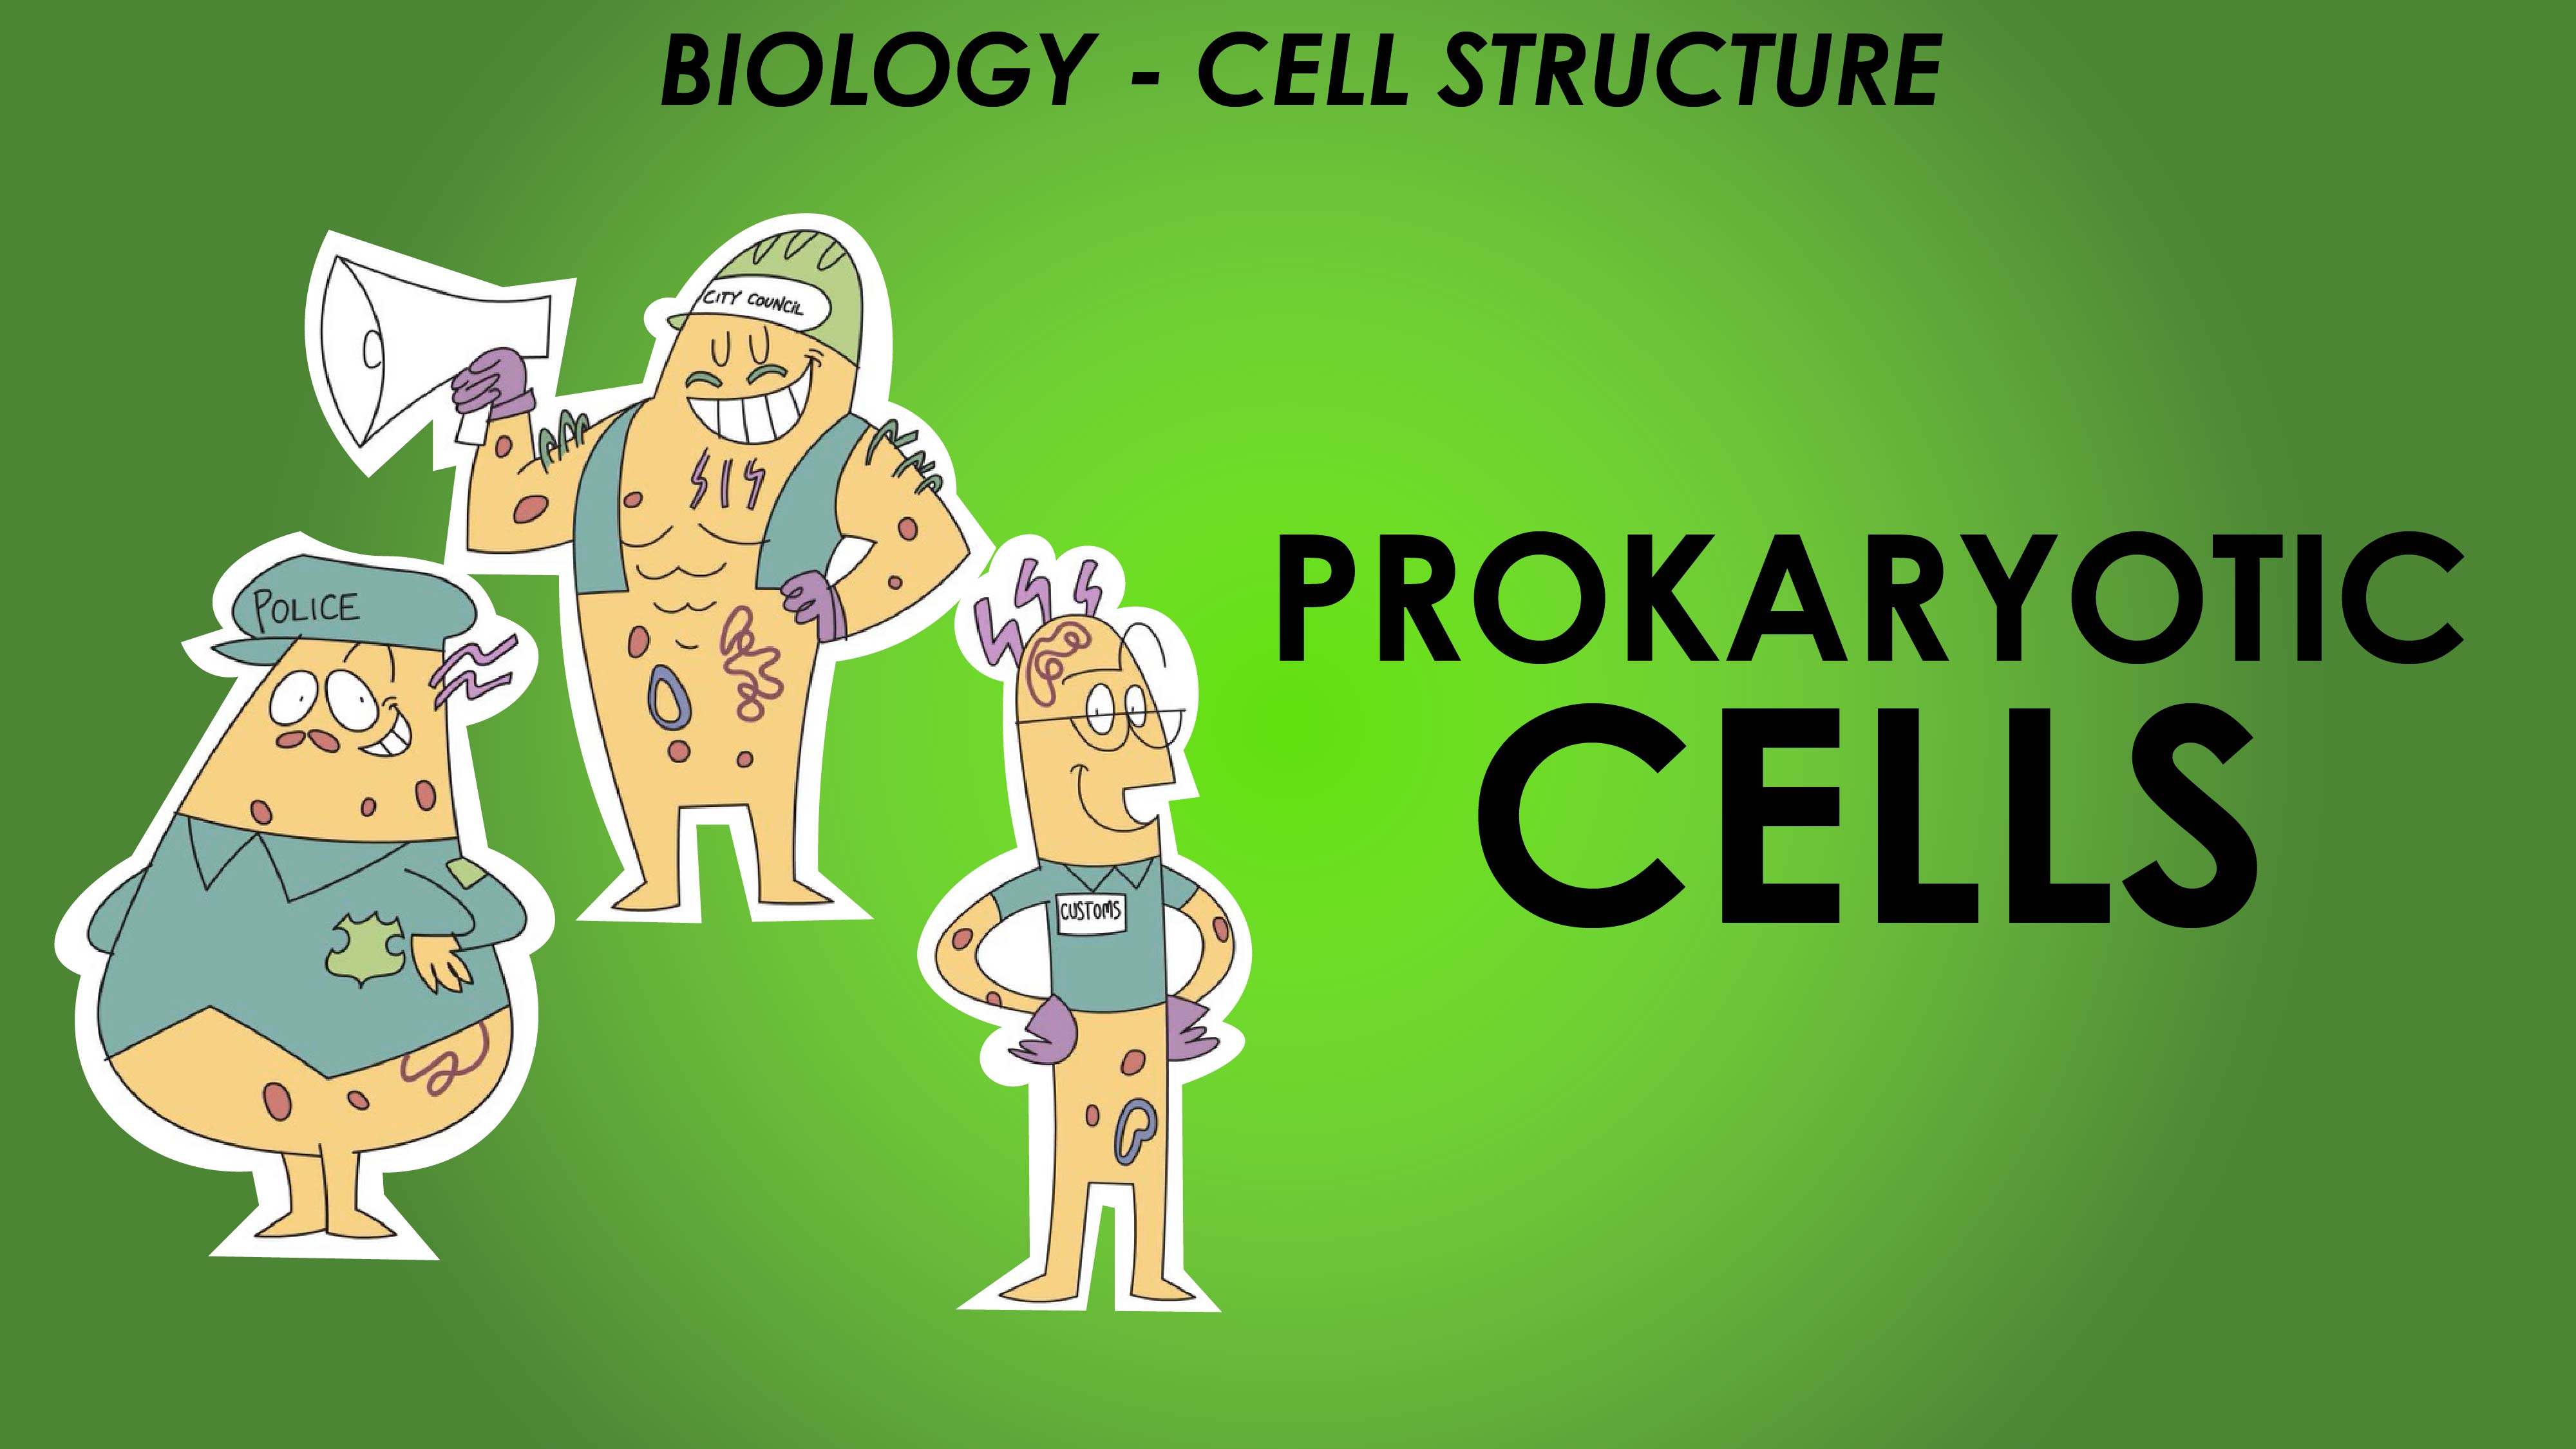 Prokaryotic Cells - Cell Structure